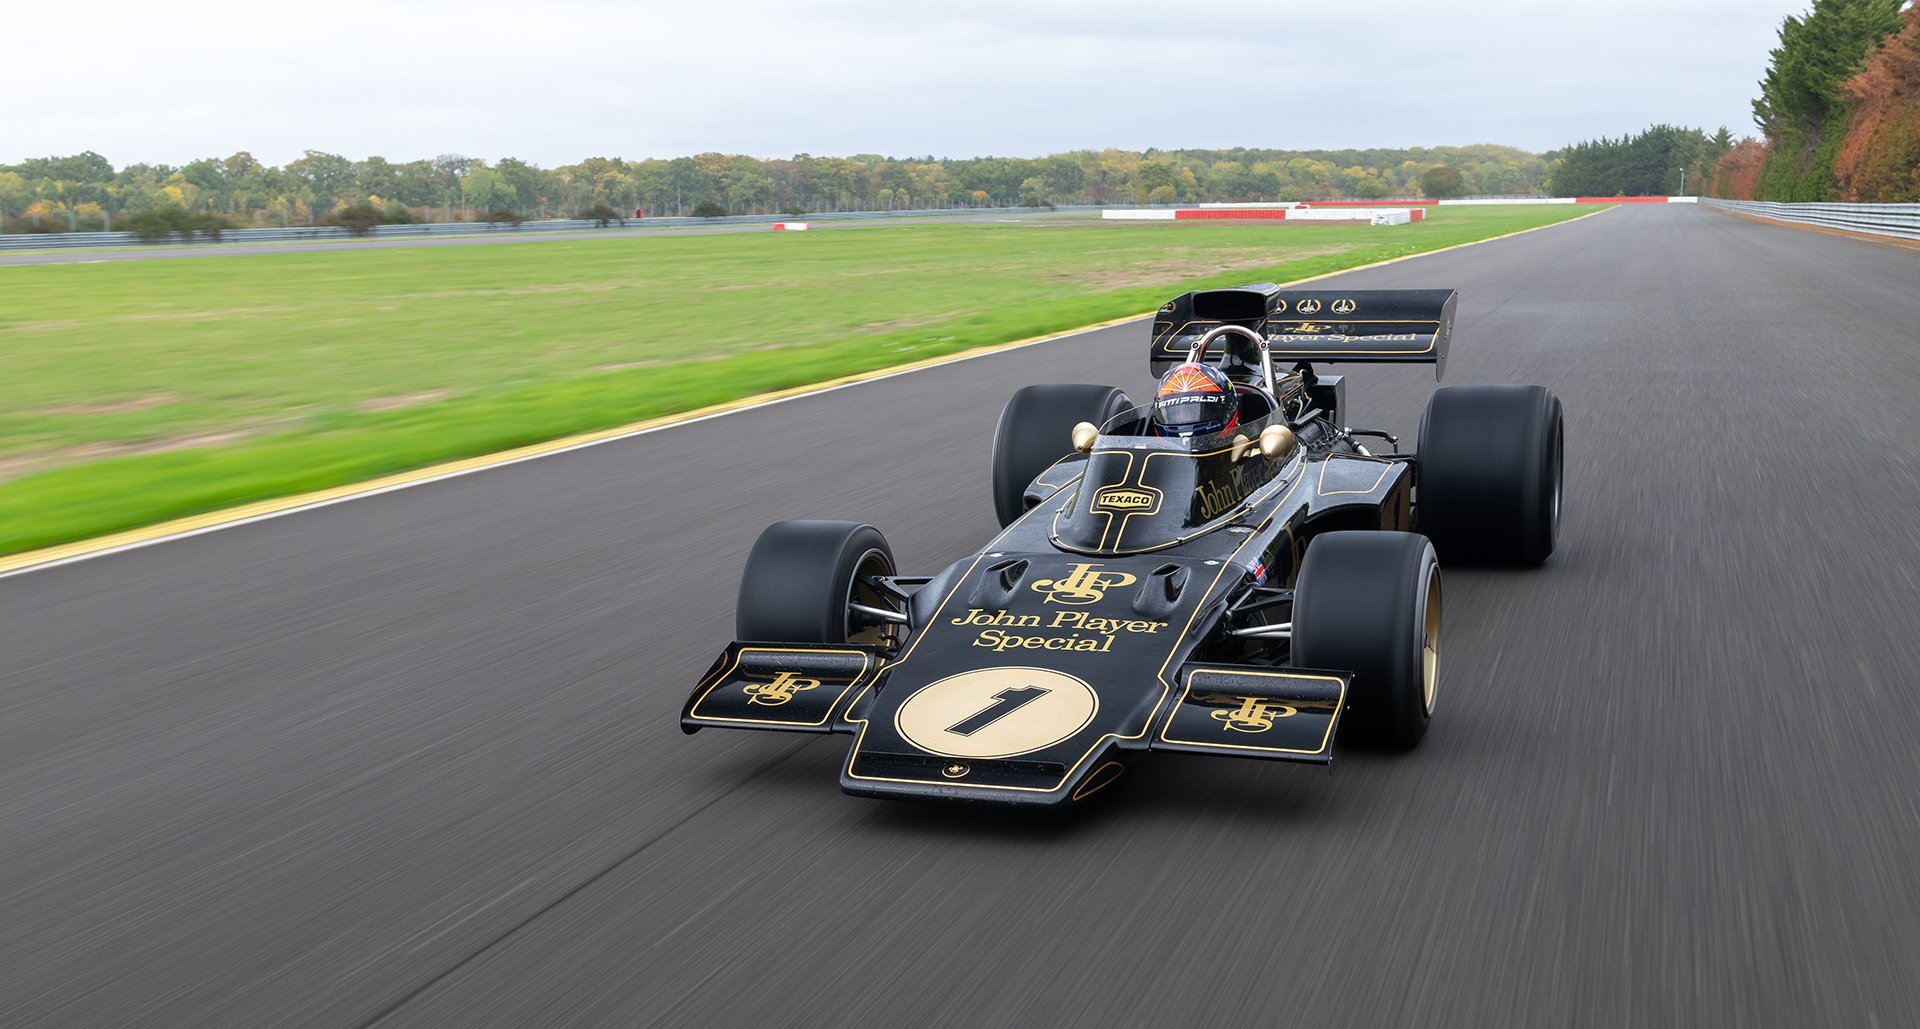 The legendary Lotus 72 with which Emerson Fittipaldi won the Formula 1 World Championship title in 1972 Destacado2